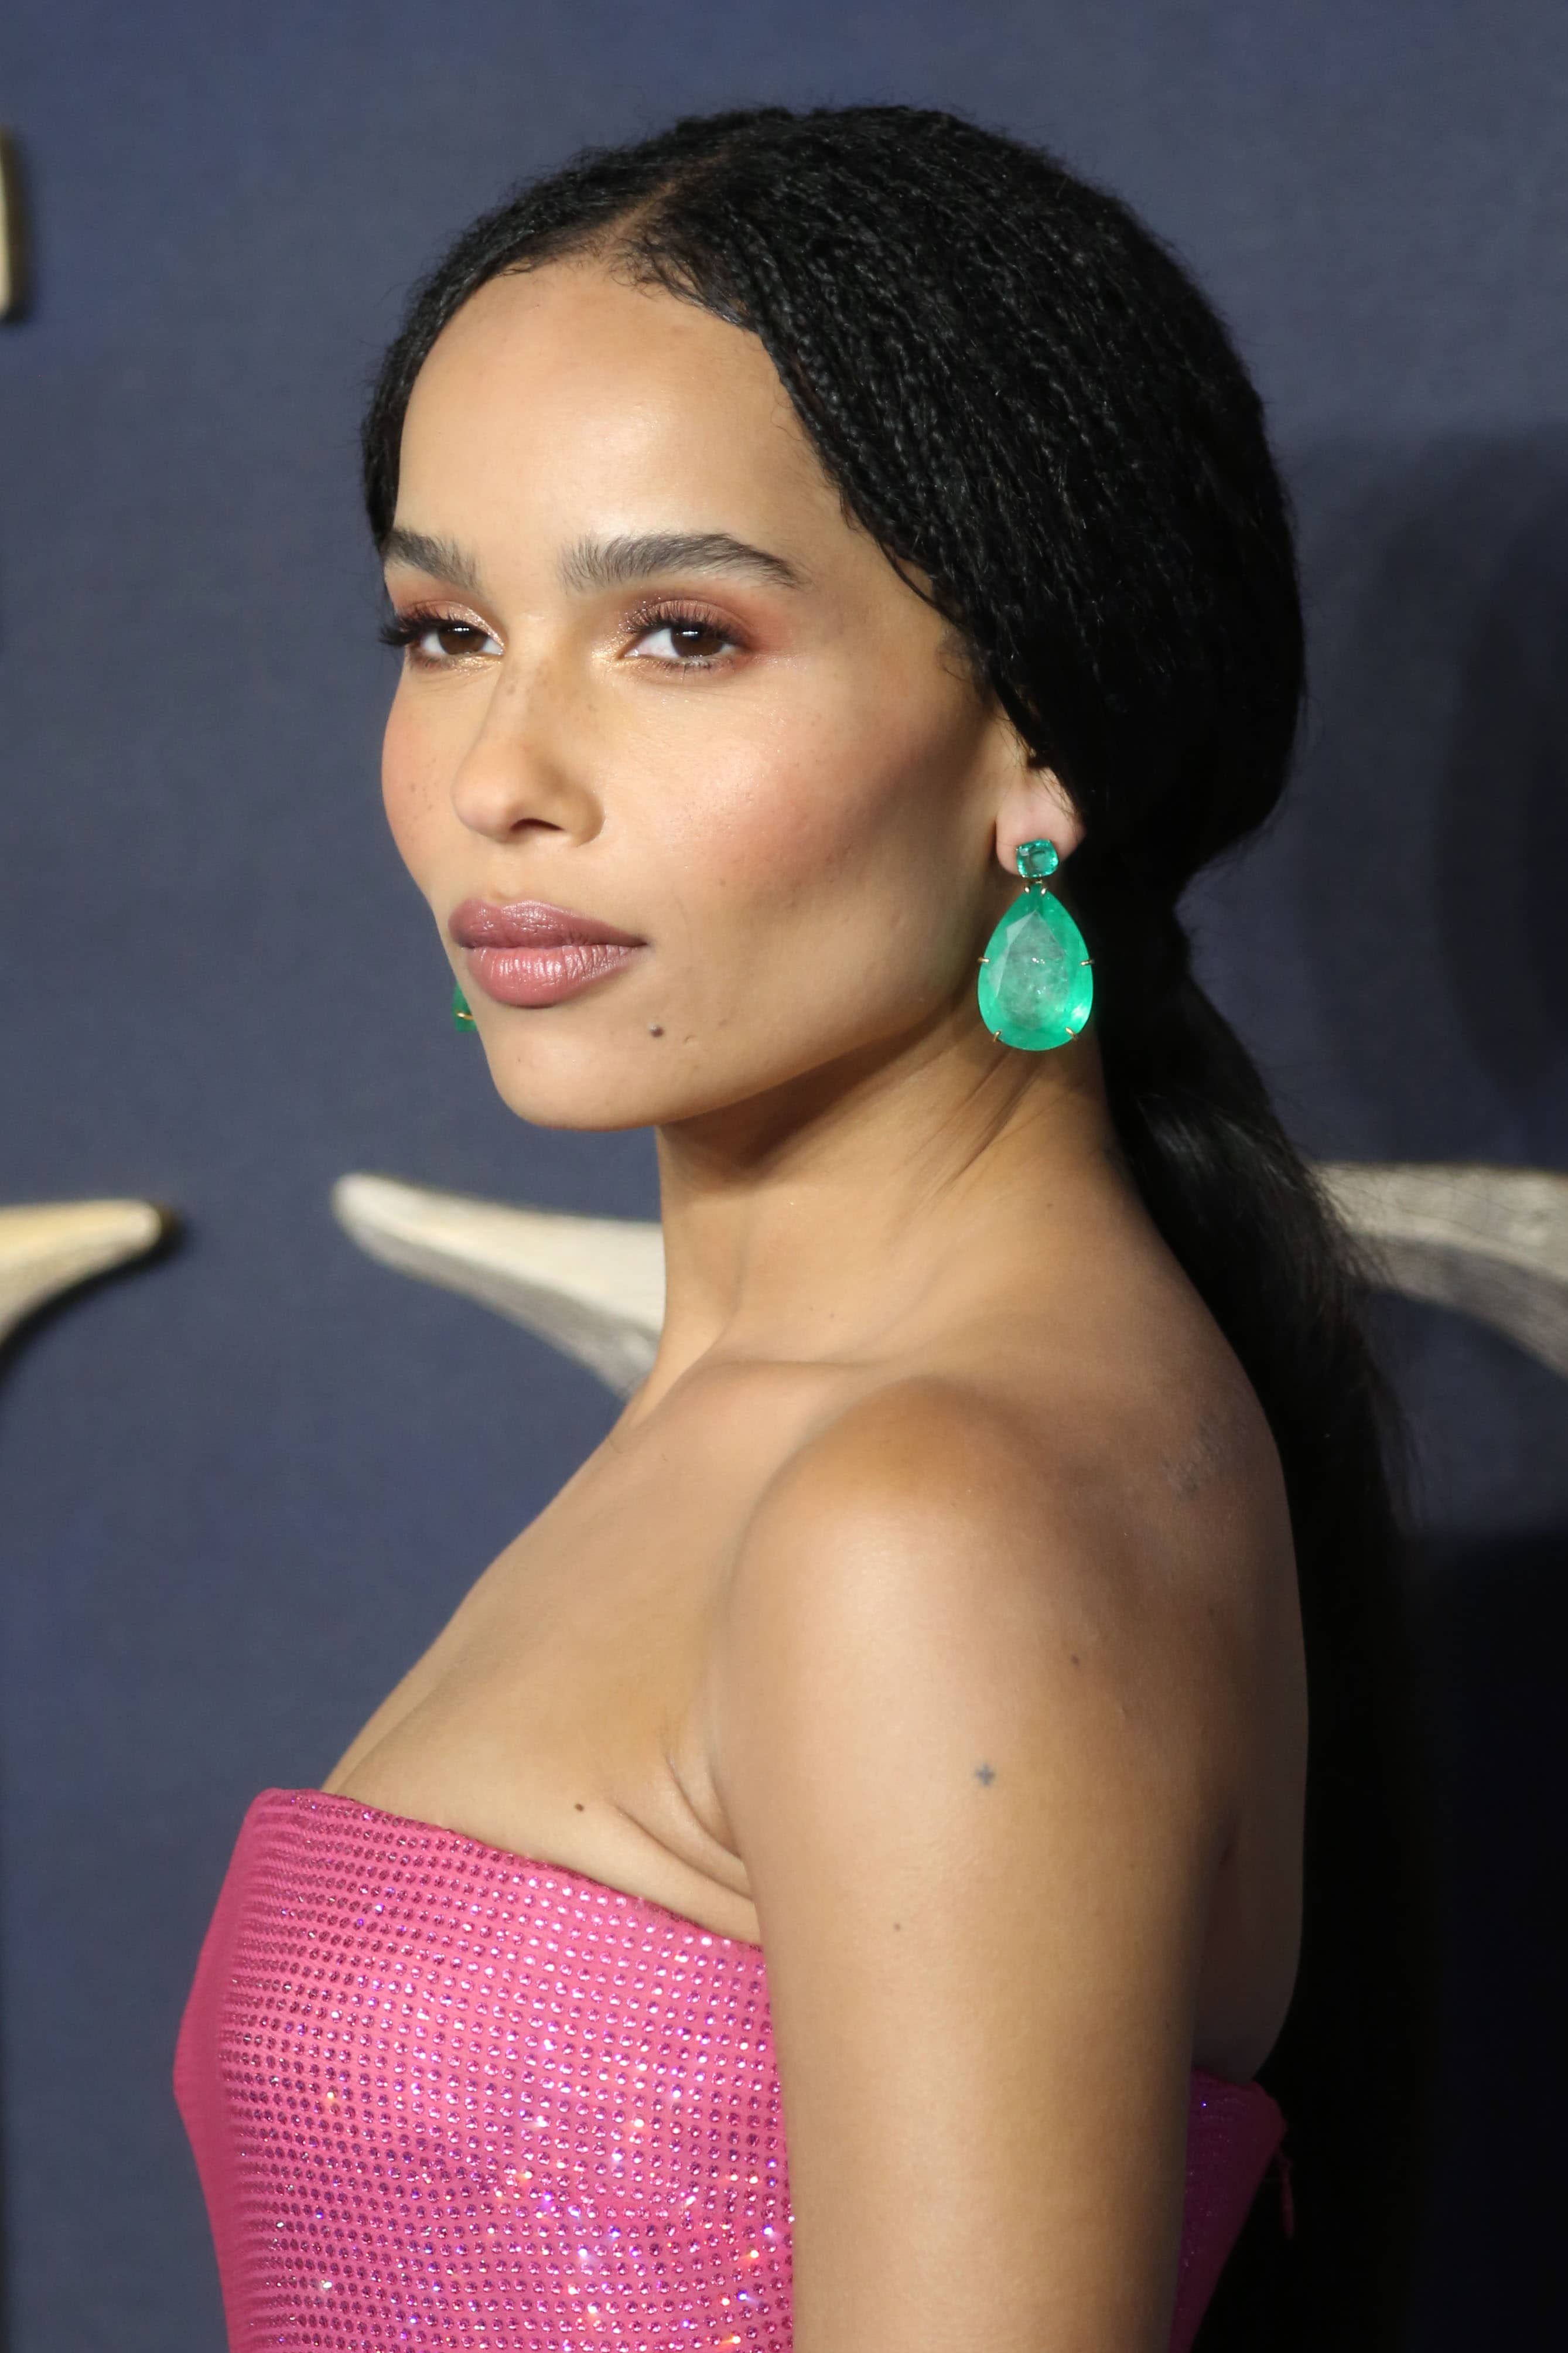 Zoe Kravitz wearing exquisite emerald drop earrings at the "Fantastic Beasts: The Crimes Of Grindelwald" UK premiere held at Cineworld Leicester Square in London, England, on November 13, 2018